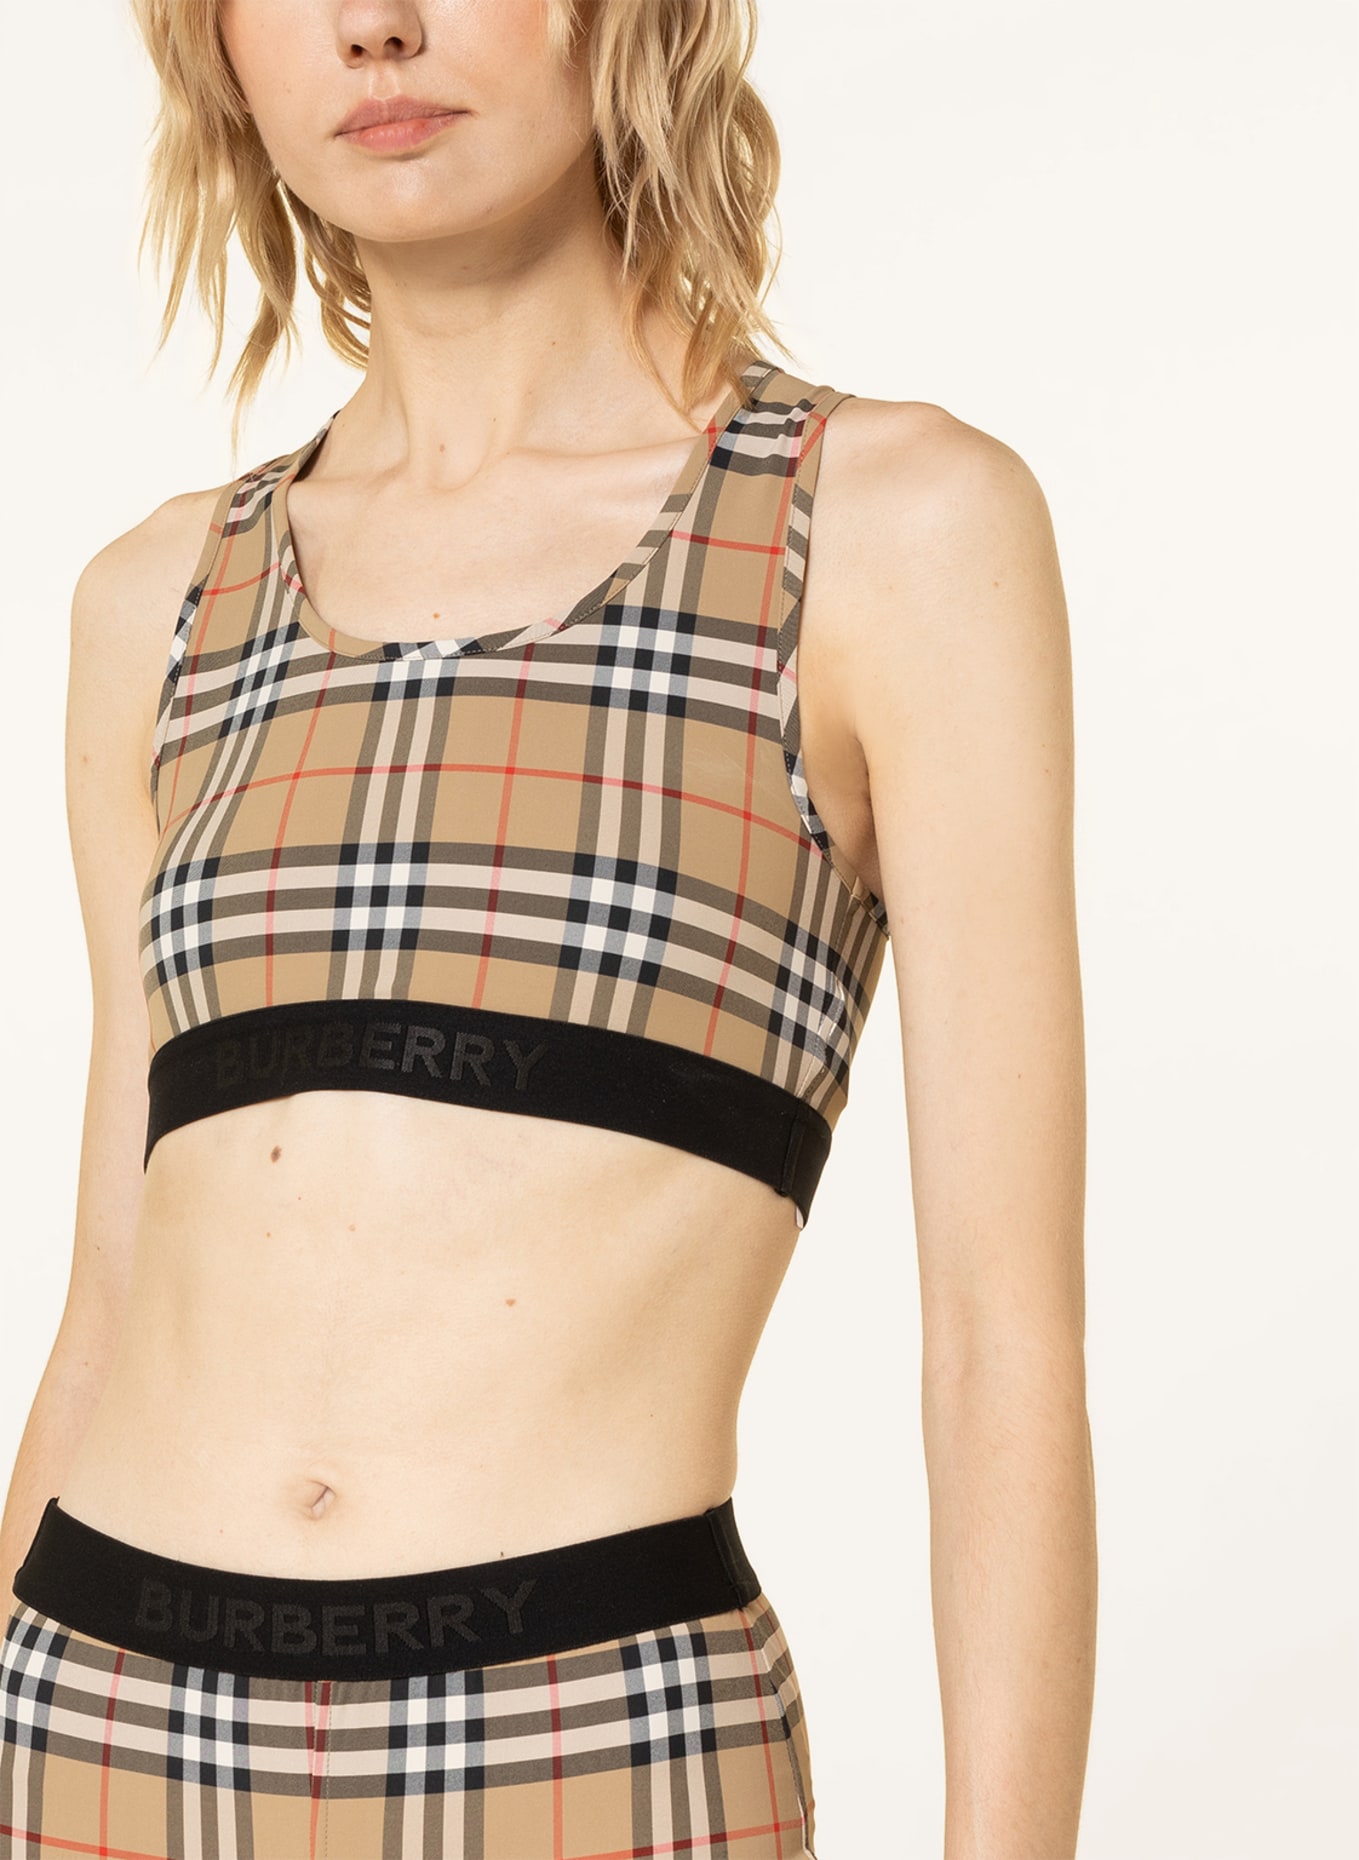 BURBERRY Cropped top DALBY, Color: BEIGE/ BROWN/ RED (Image 4)